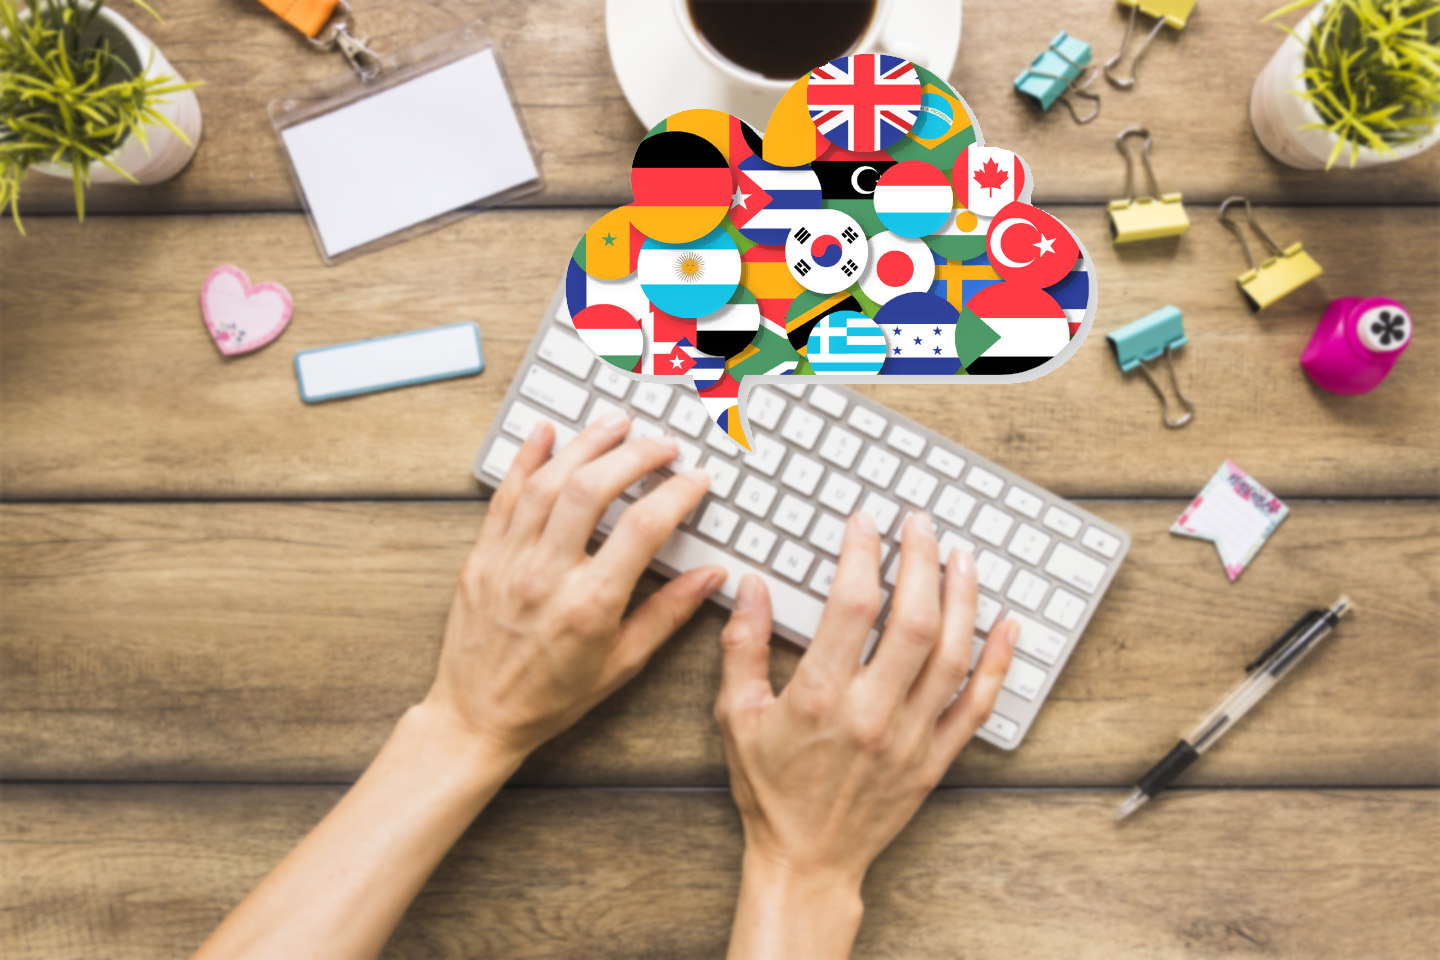 How to Manage your multilingual social media account?